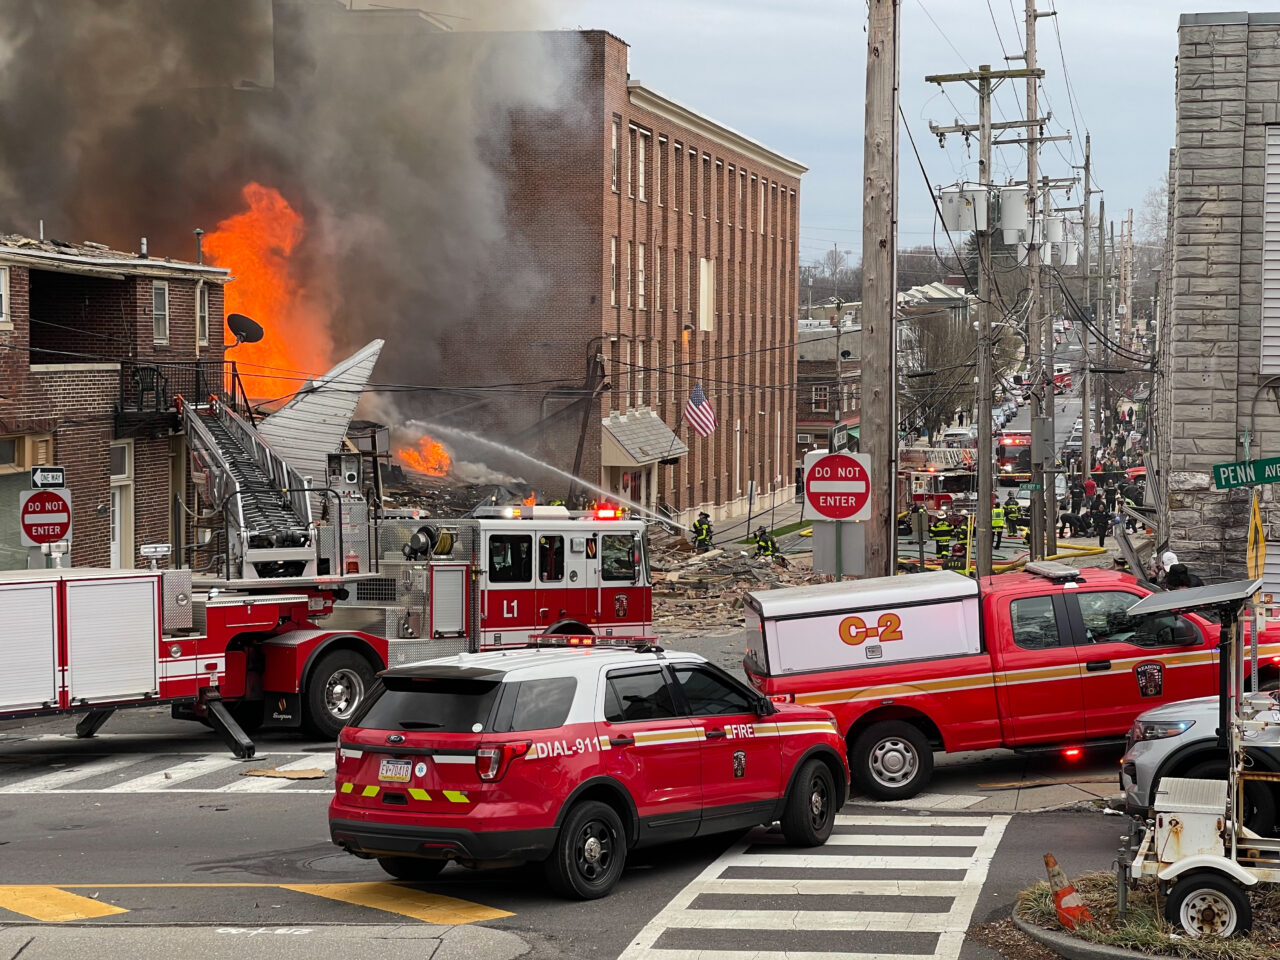 Emergency crews respond to R.M. Palmer Co. on March 24, 2023 after an explosion destroyed part of the candy factory.